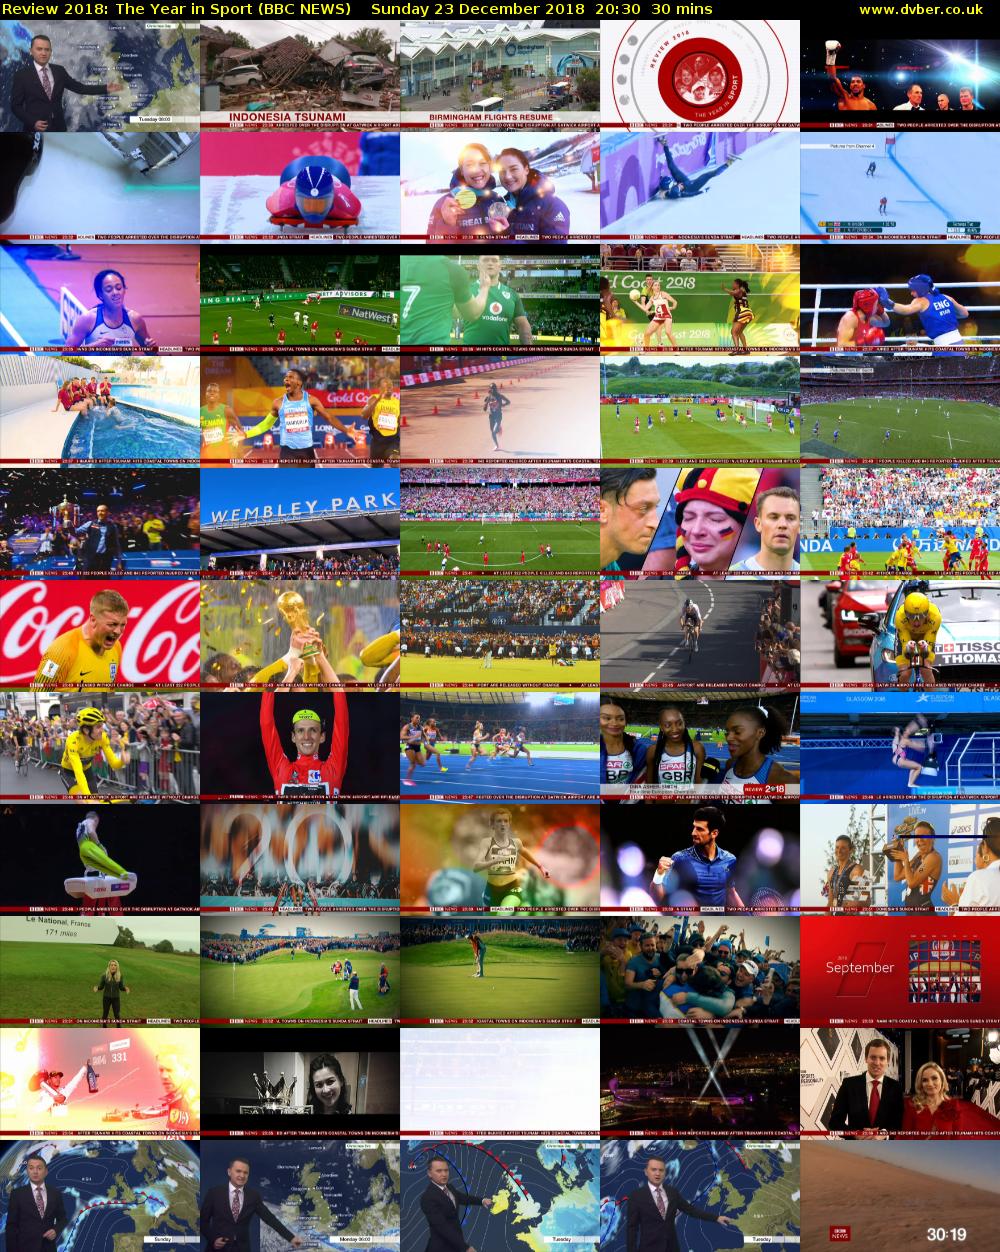 Review 2018: The Year in Sport (BBC NEWS) Sunday 23 December 2018 20:30 - 21:00